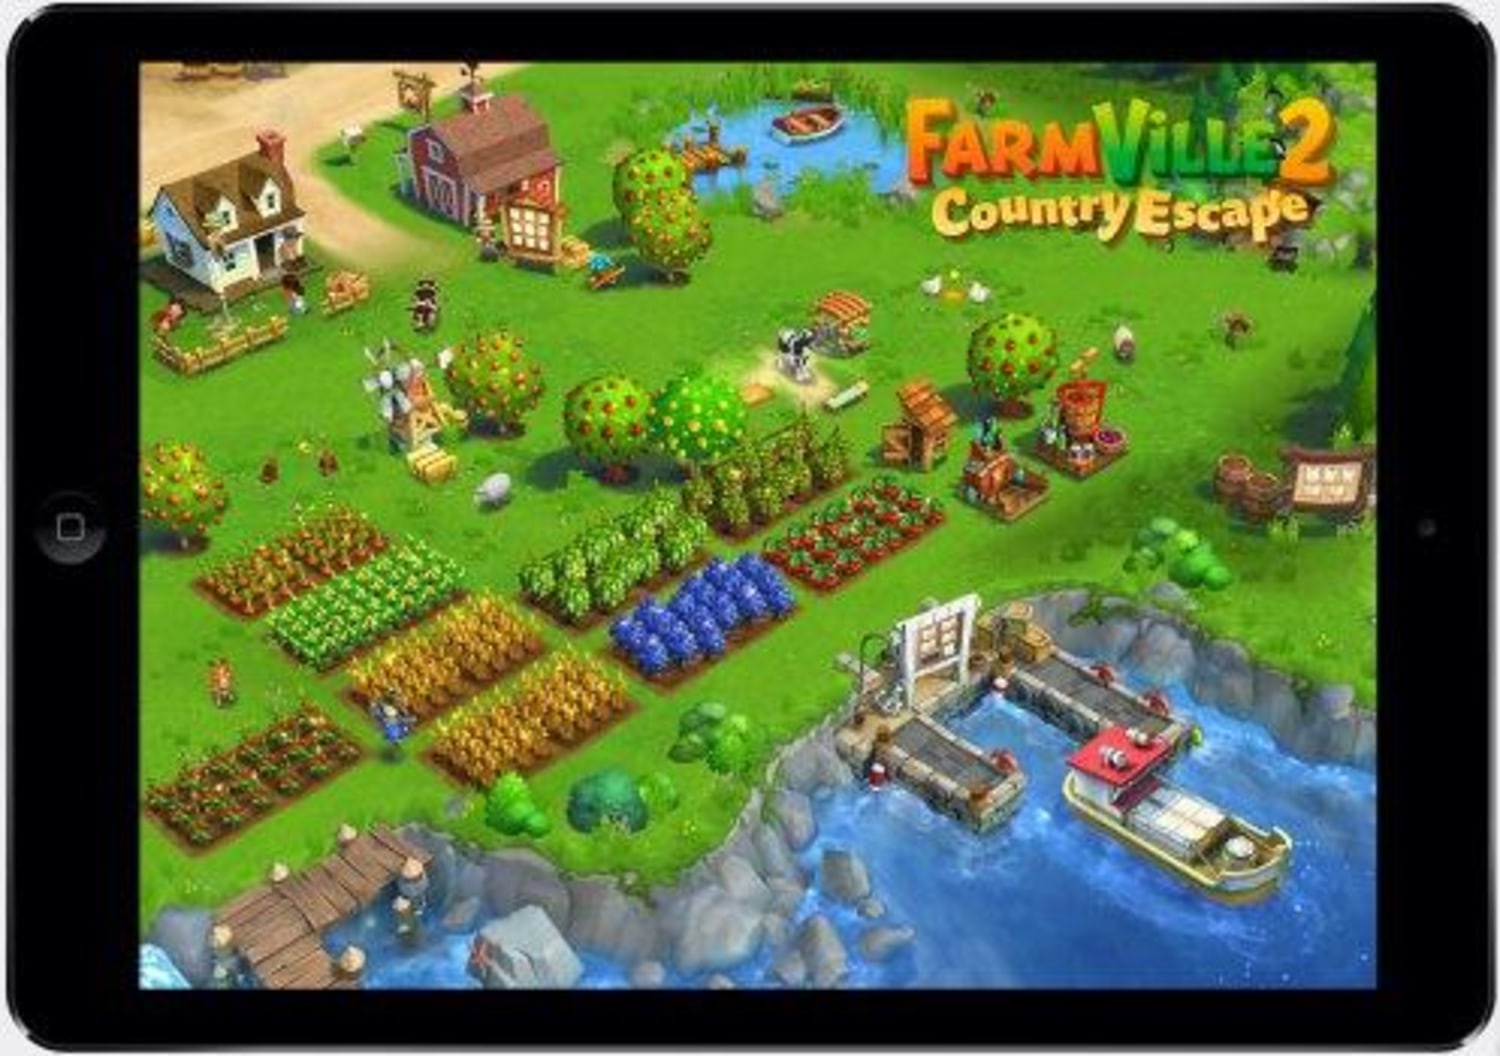 Play FarmVille 2: Country Escape online for Free on PC & Mobile